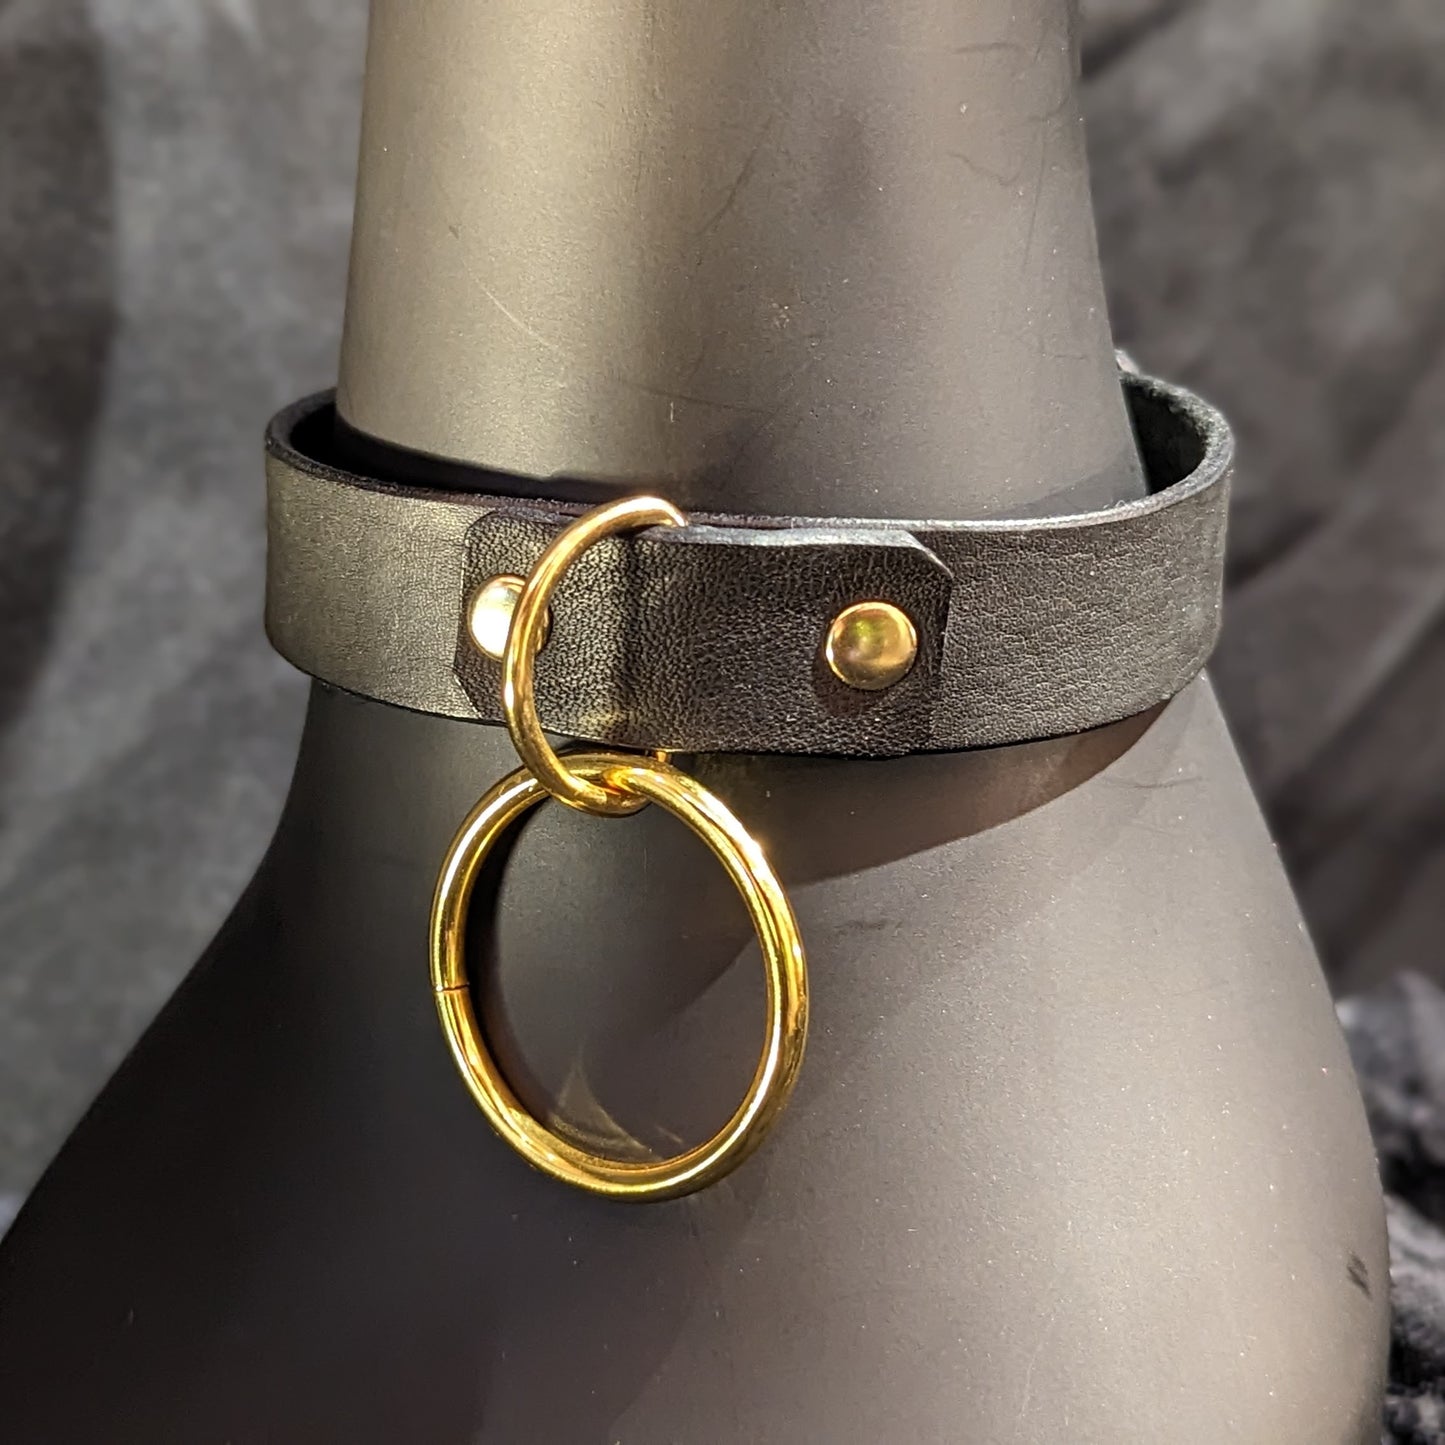 Black leather collar by Smell My Leather. Simple single layer of leather with a 1.5" dangling O-Ring. This has gold hardware.